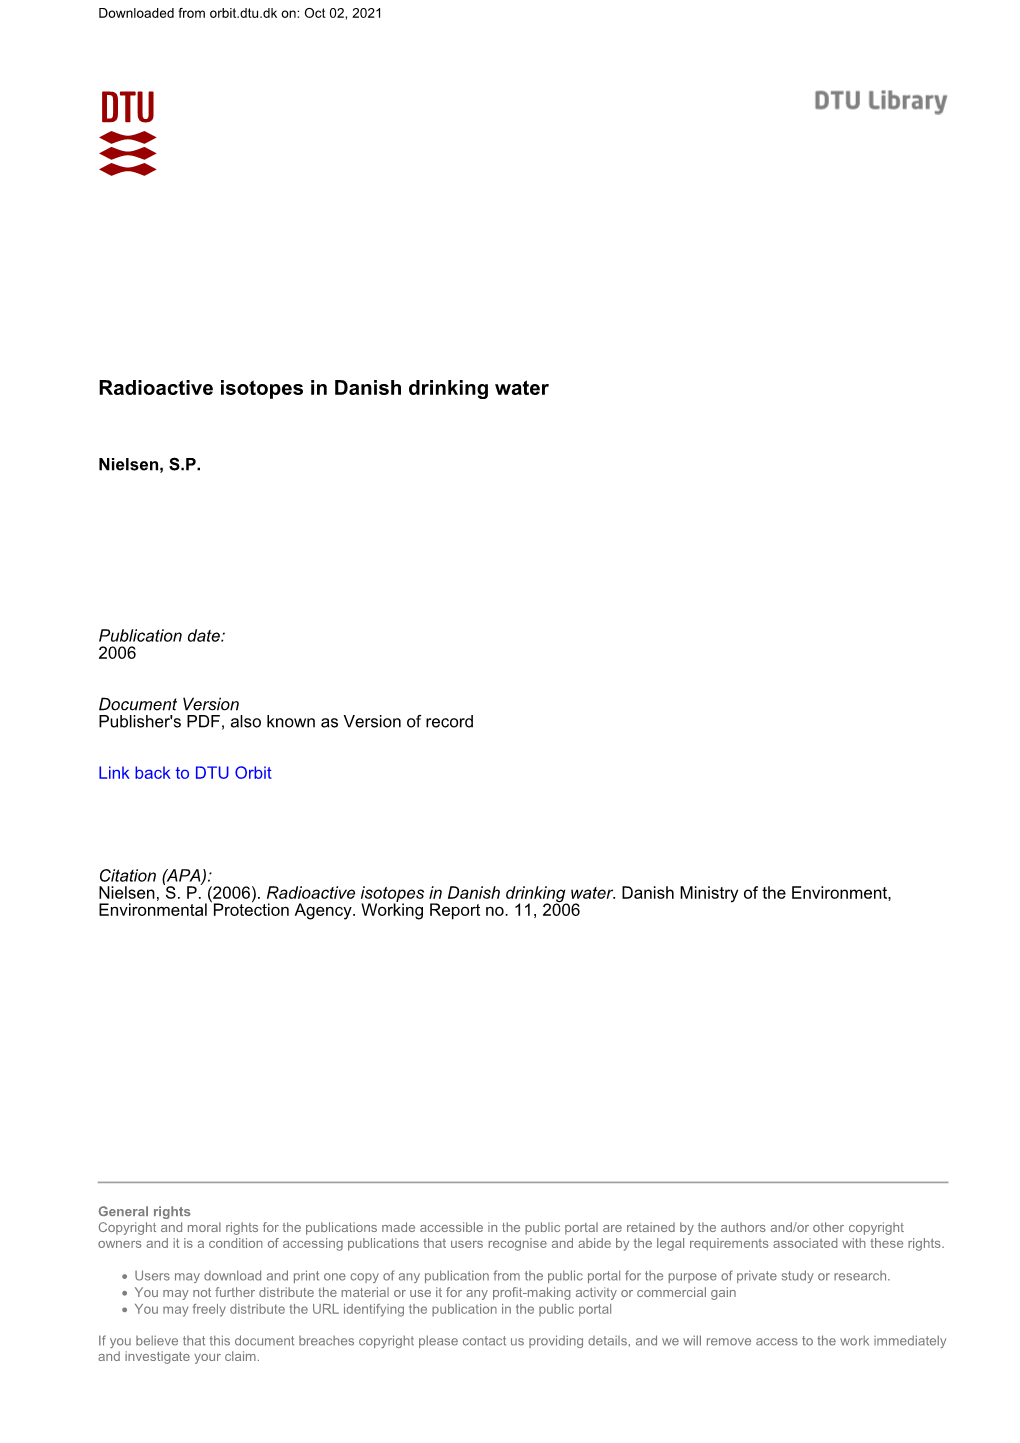 Radioactive Isotopes in Danish Drinking Water